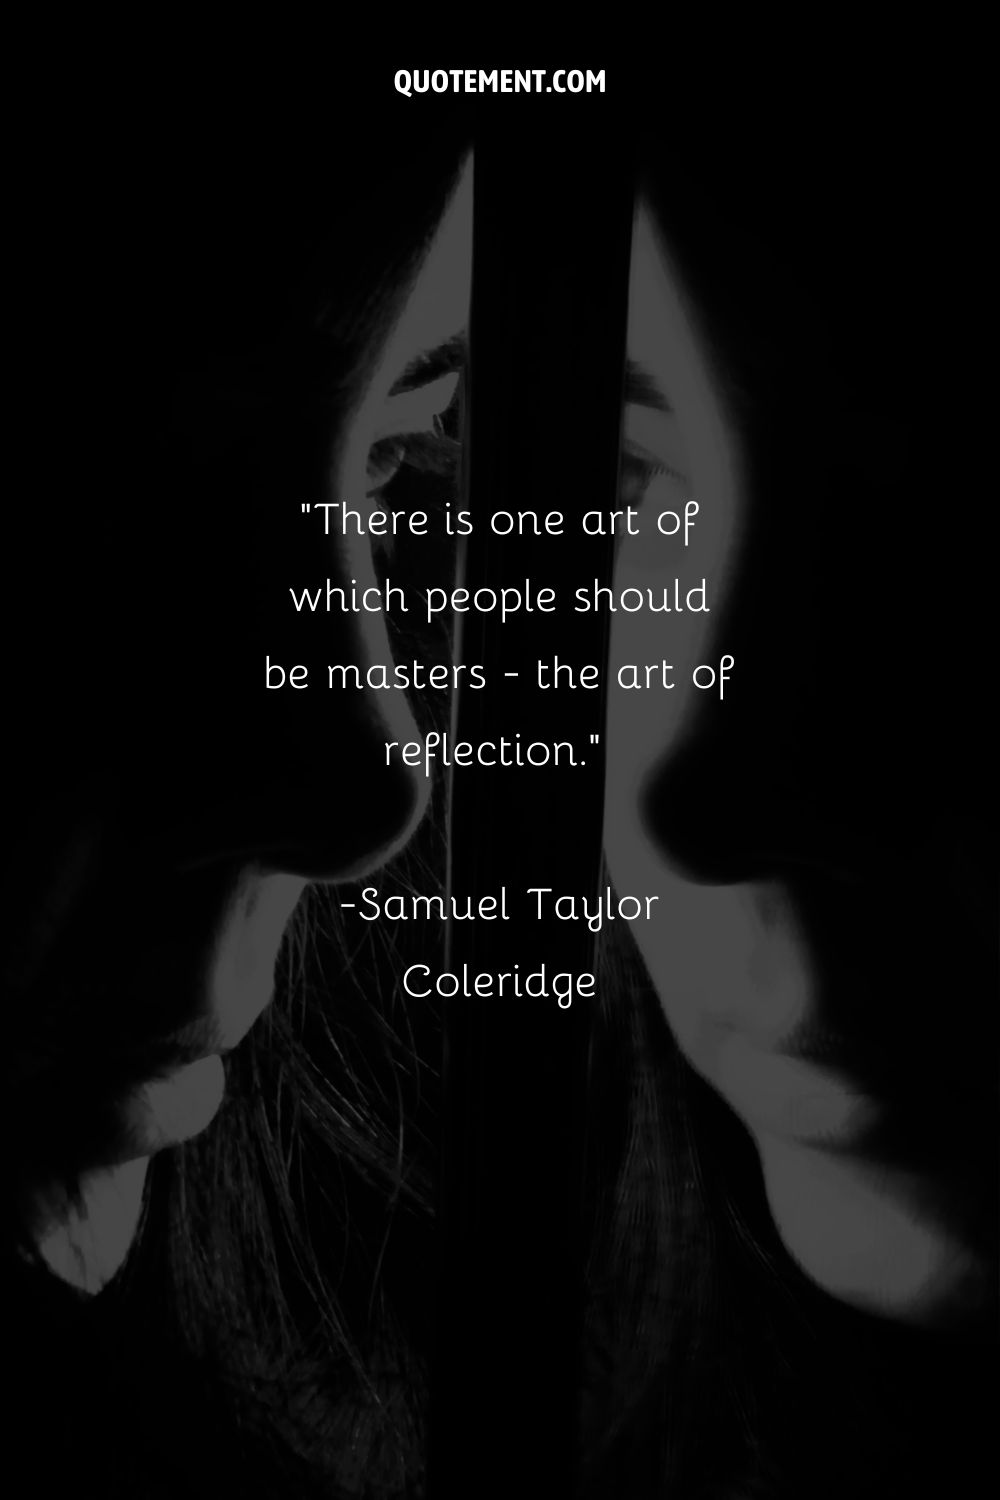 A reflective image of a woman's face representing the best reflection quote